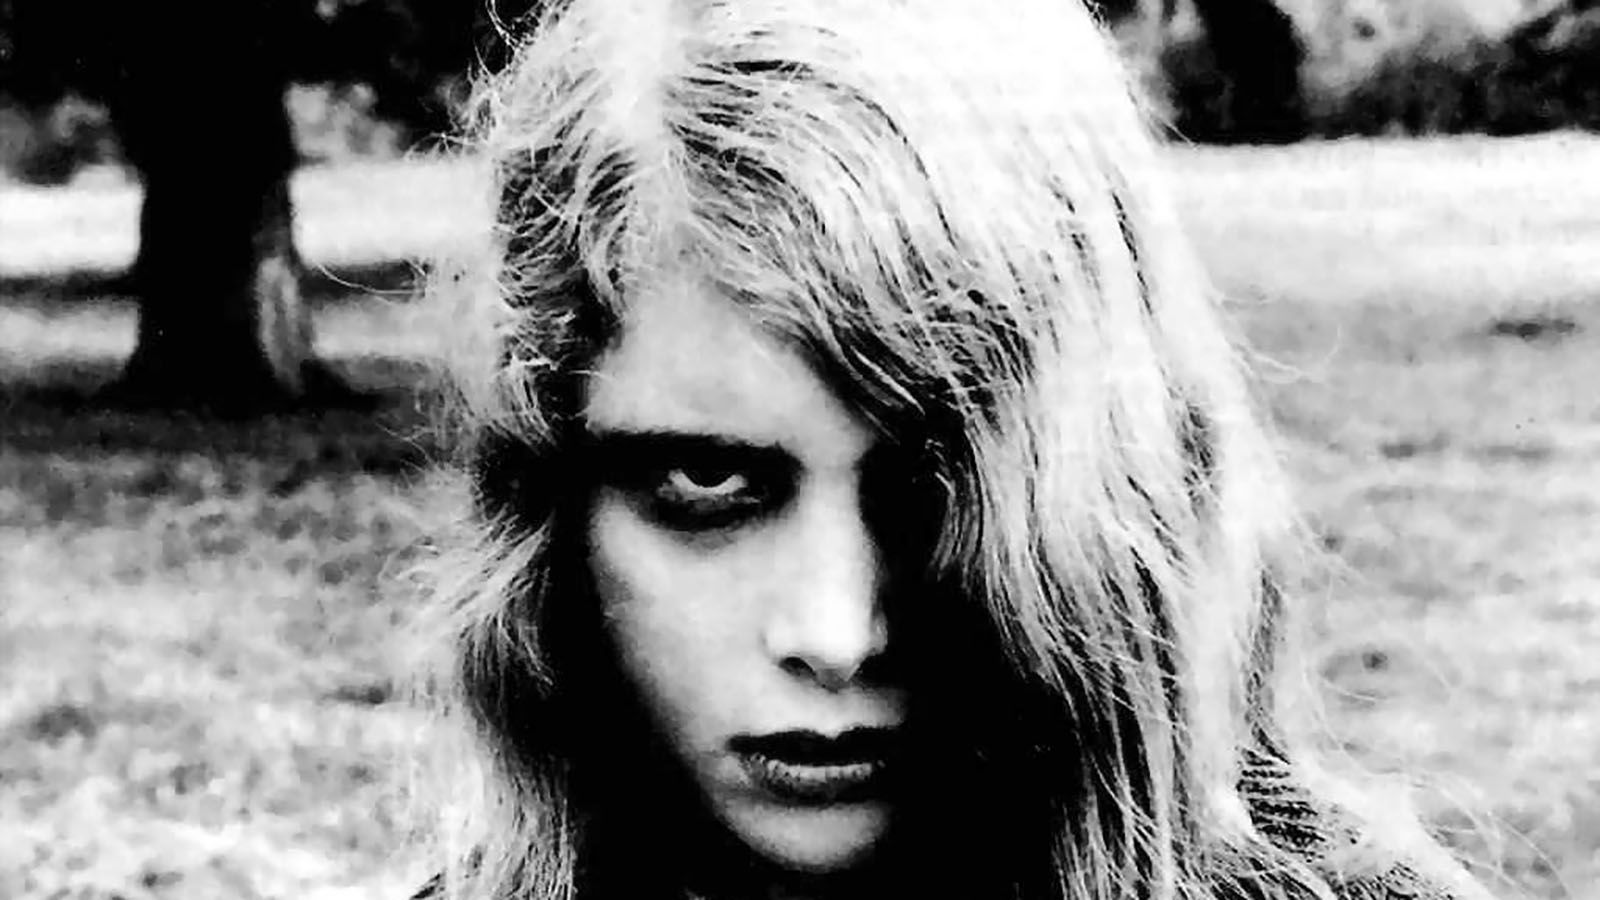 On Thursday, Oct. 5, Purdue University Fort Wayne will hold a screening of Night of the Living Dead with Morricone Youth supplying a live score.